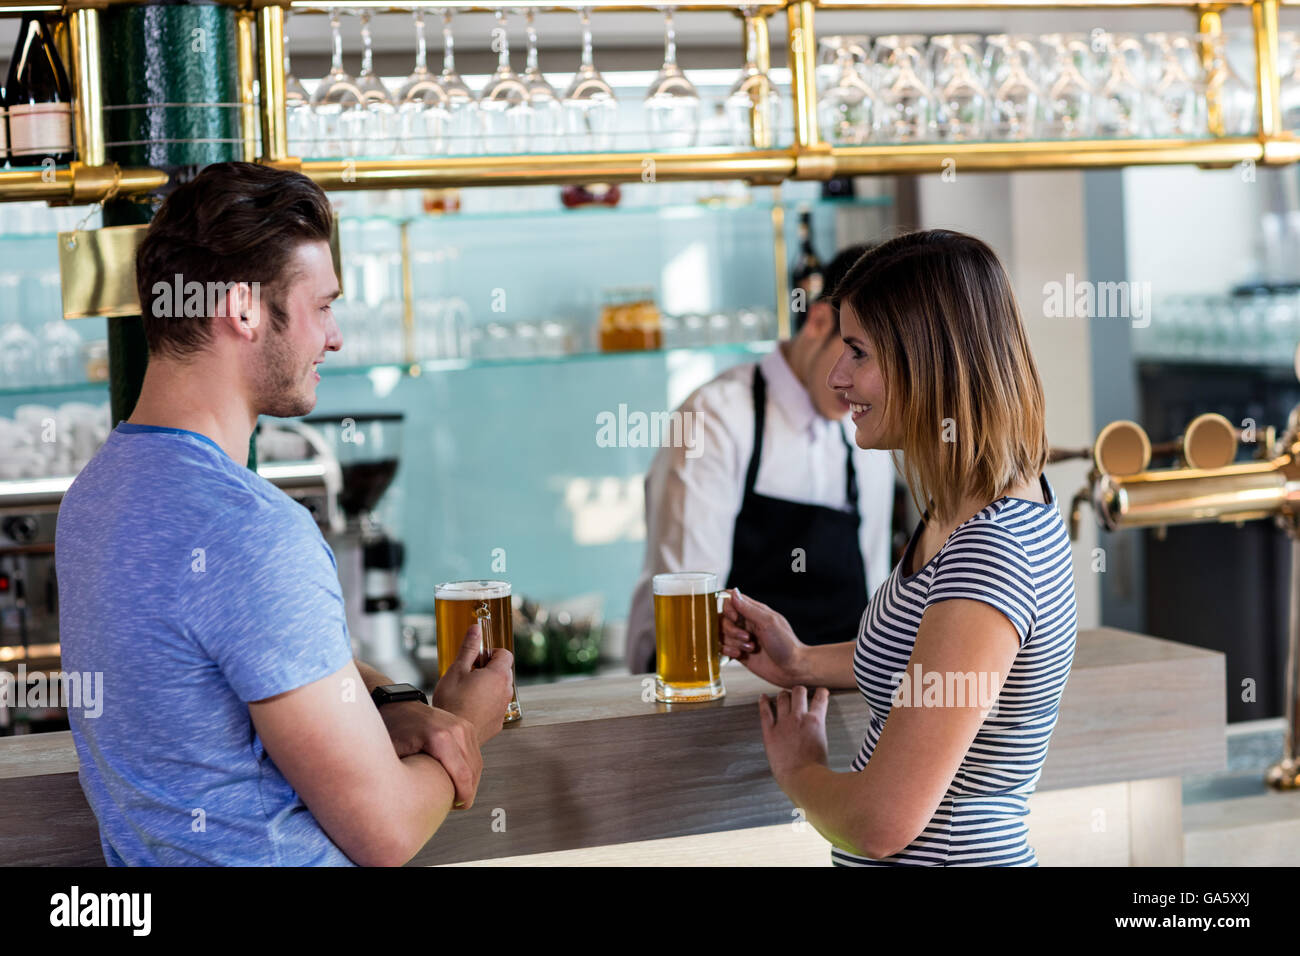 Couple smiling while having beer at counter Stock Photo